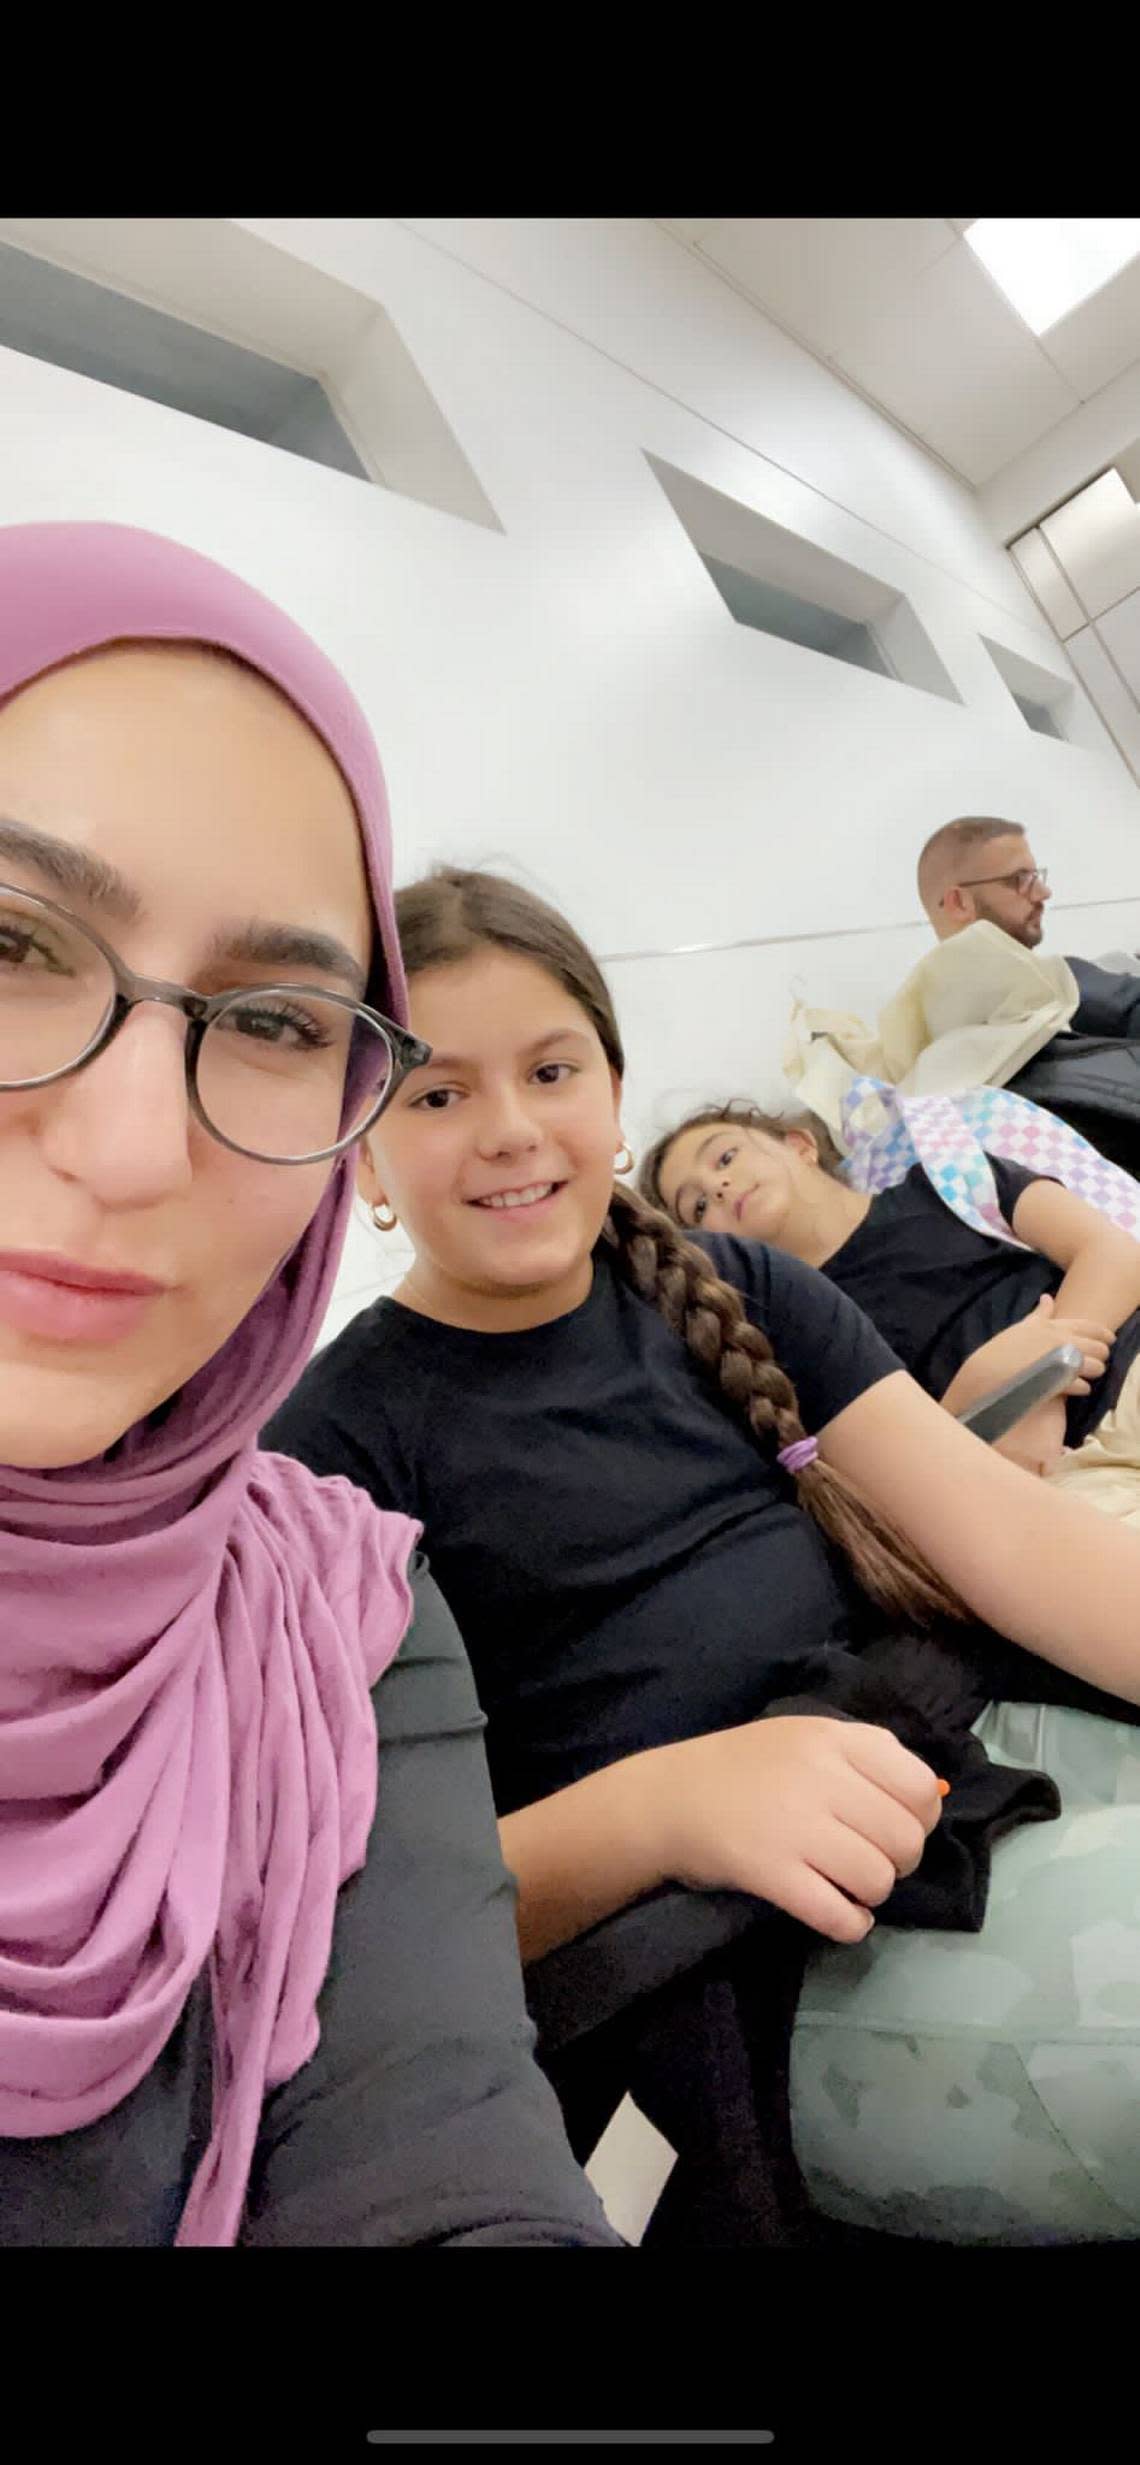 Lana Shehadeh poses with her daughters Lilly and Talia. Shehadeh, who grew up in Parkland, Florida, is an assistant professor of political science at the Arab American University and lives in the West Bank.